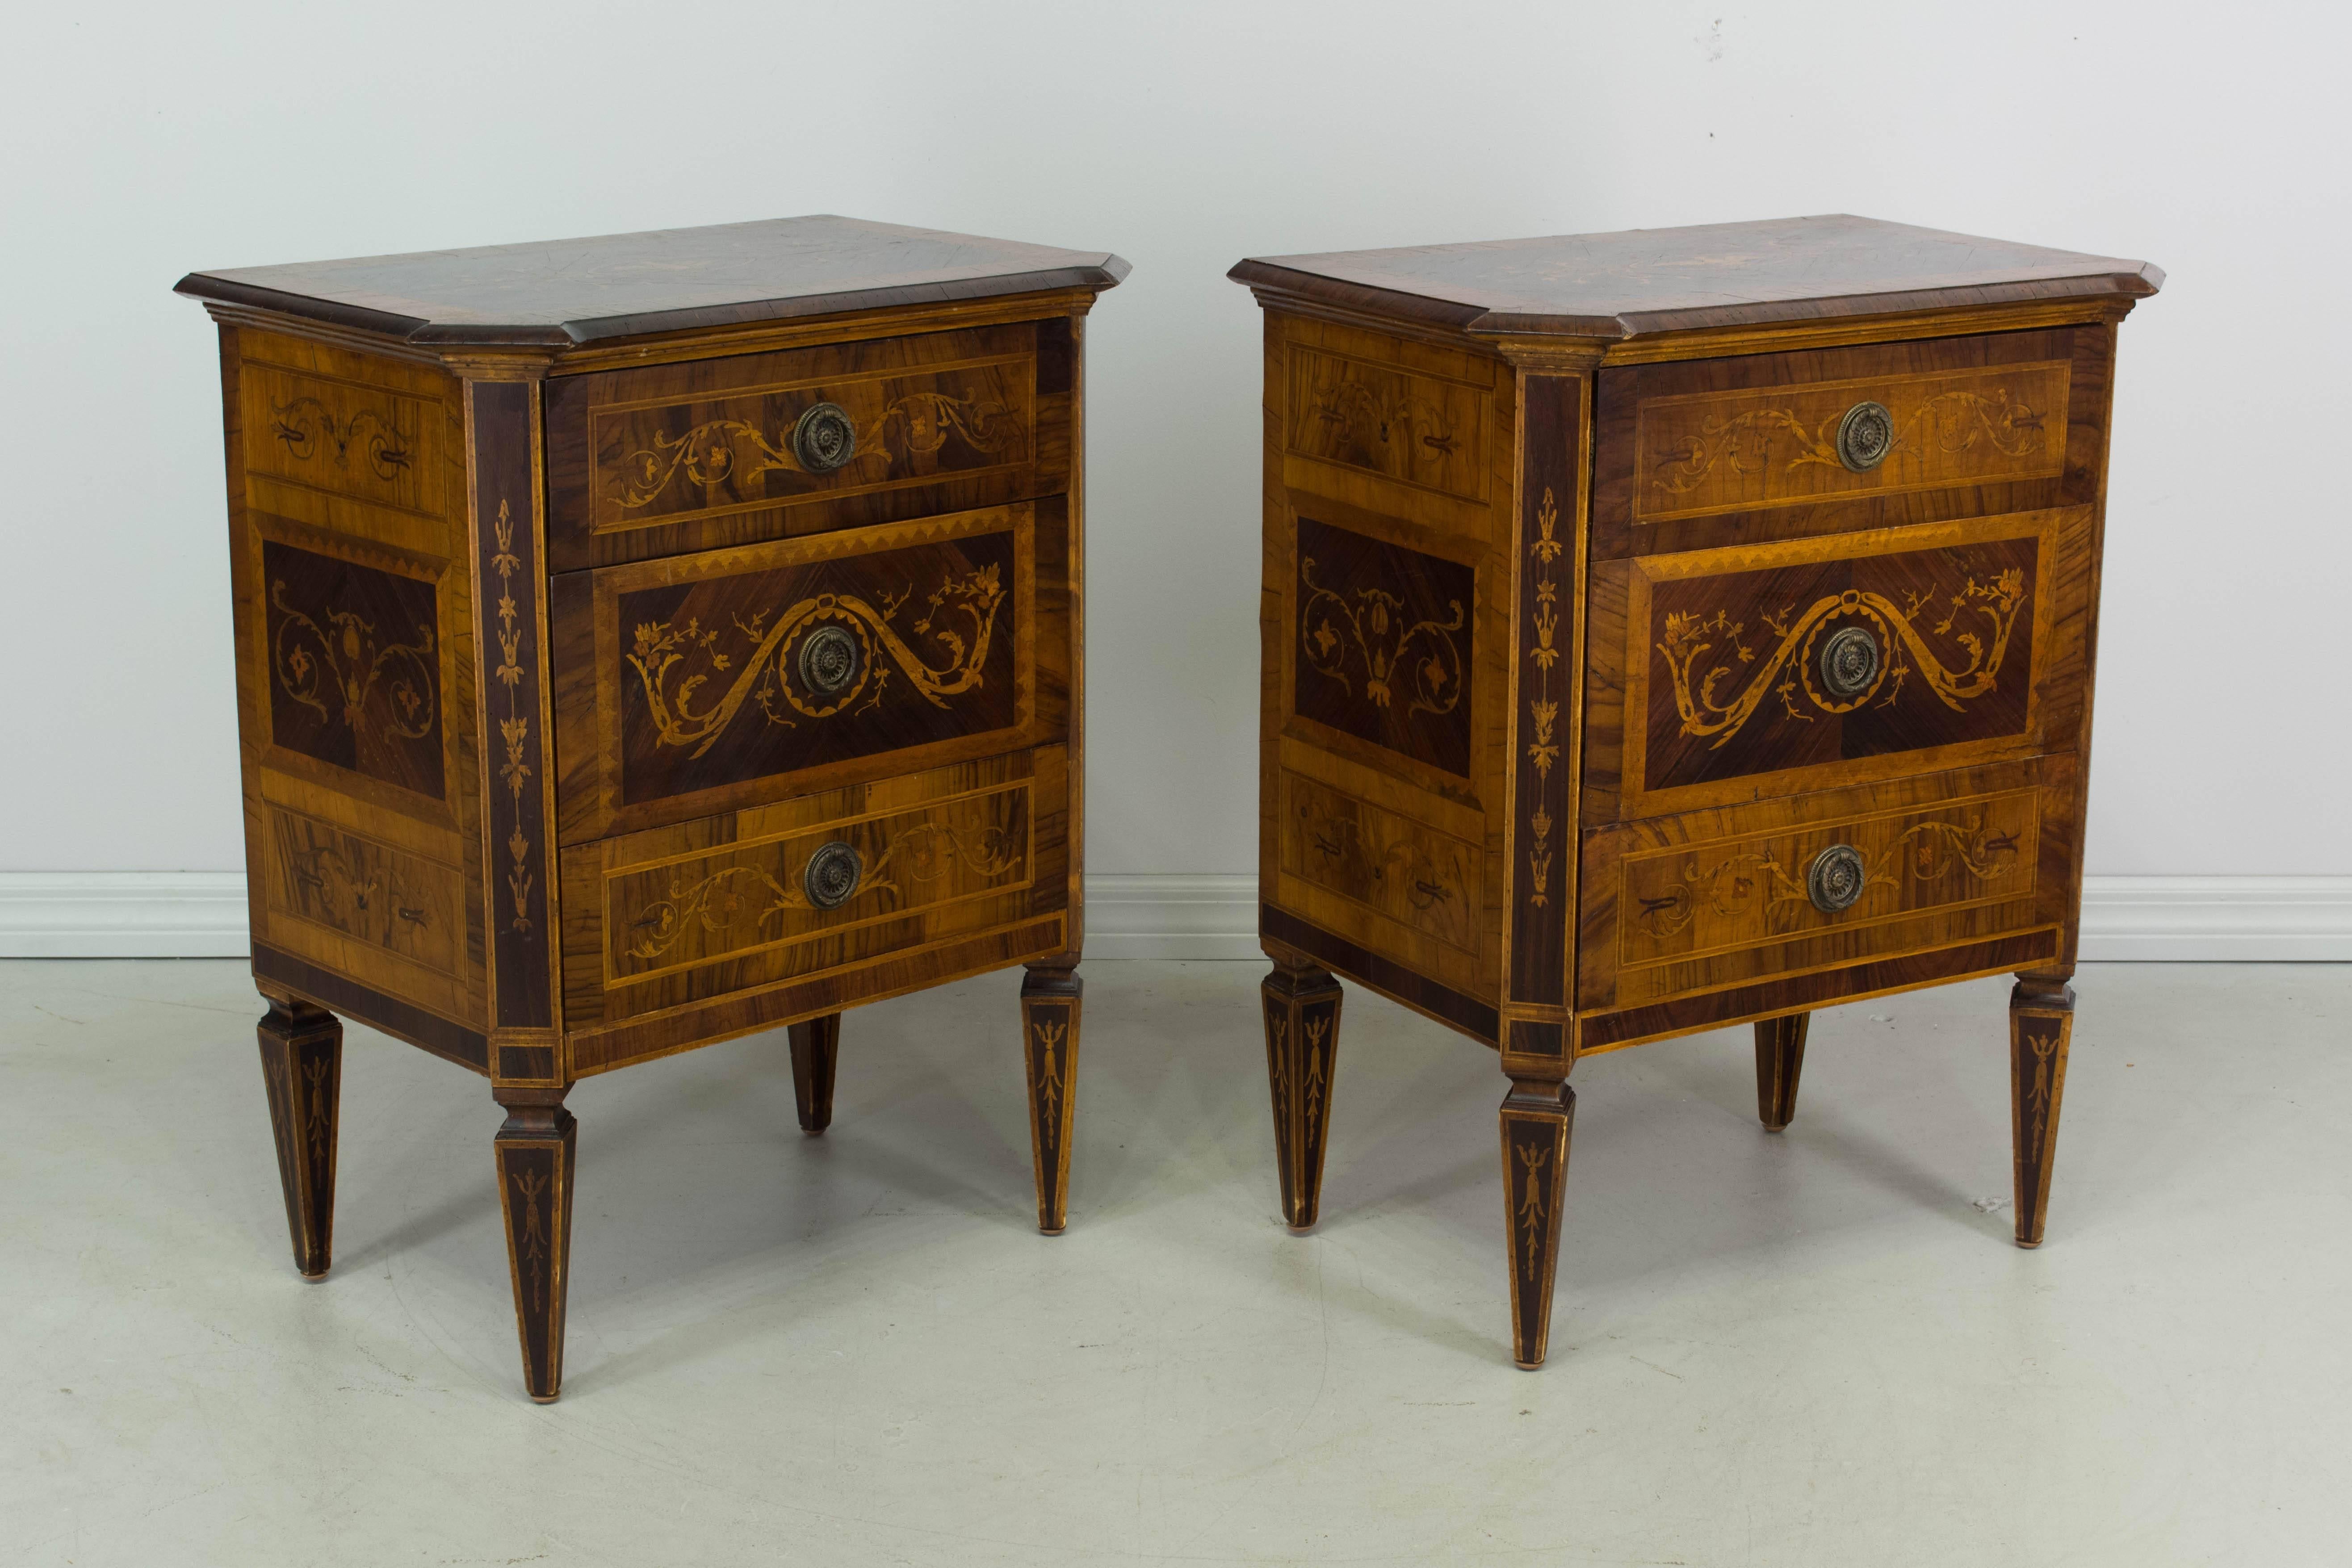 A pair of Italian marquetry commodes or chests of drawers made of walnut with the top, front and sides inlaid with various exotic woods with foliate motifs. Three drawers with original ring pulls. Neoclassical squared and tapering legs. All original